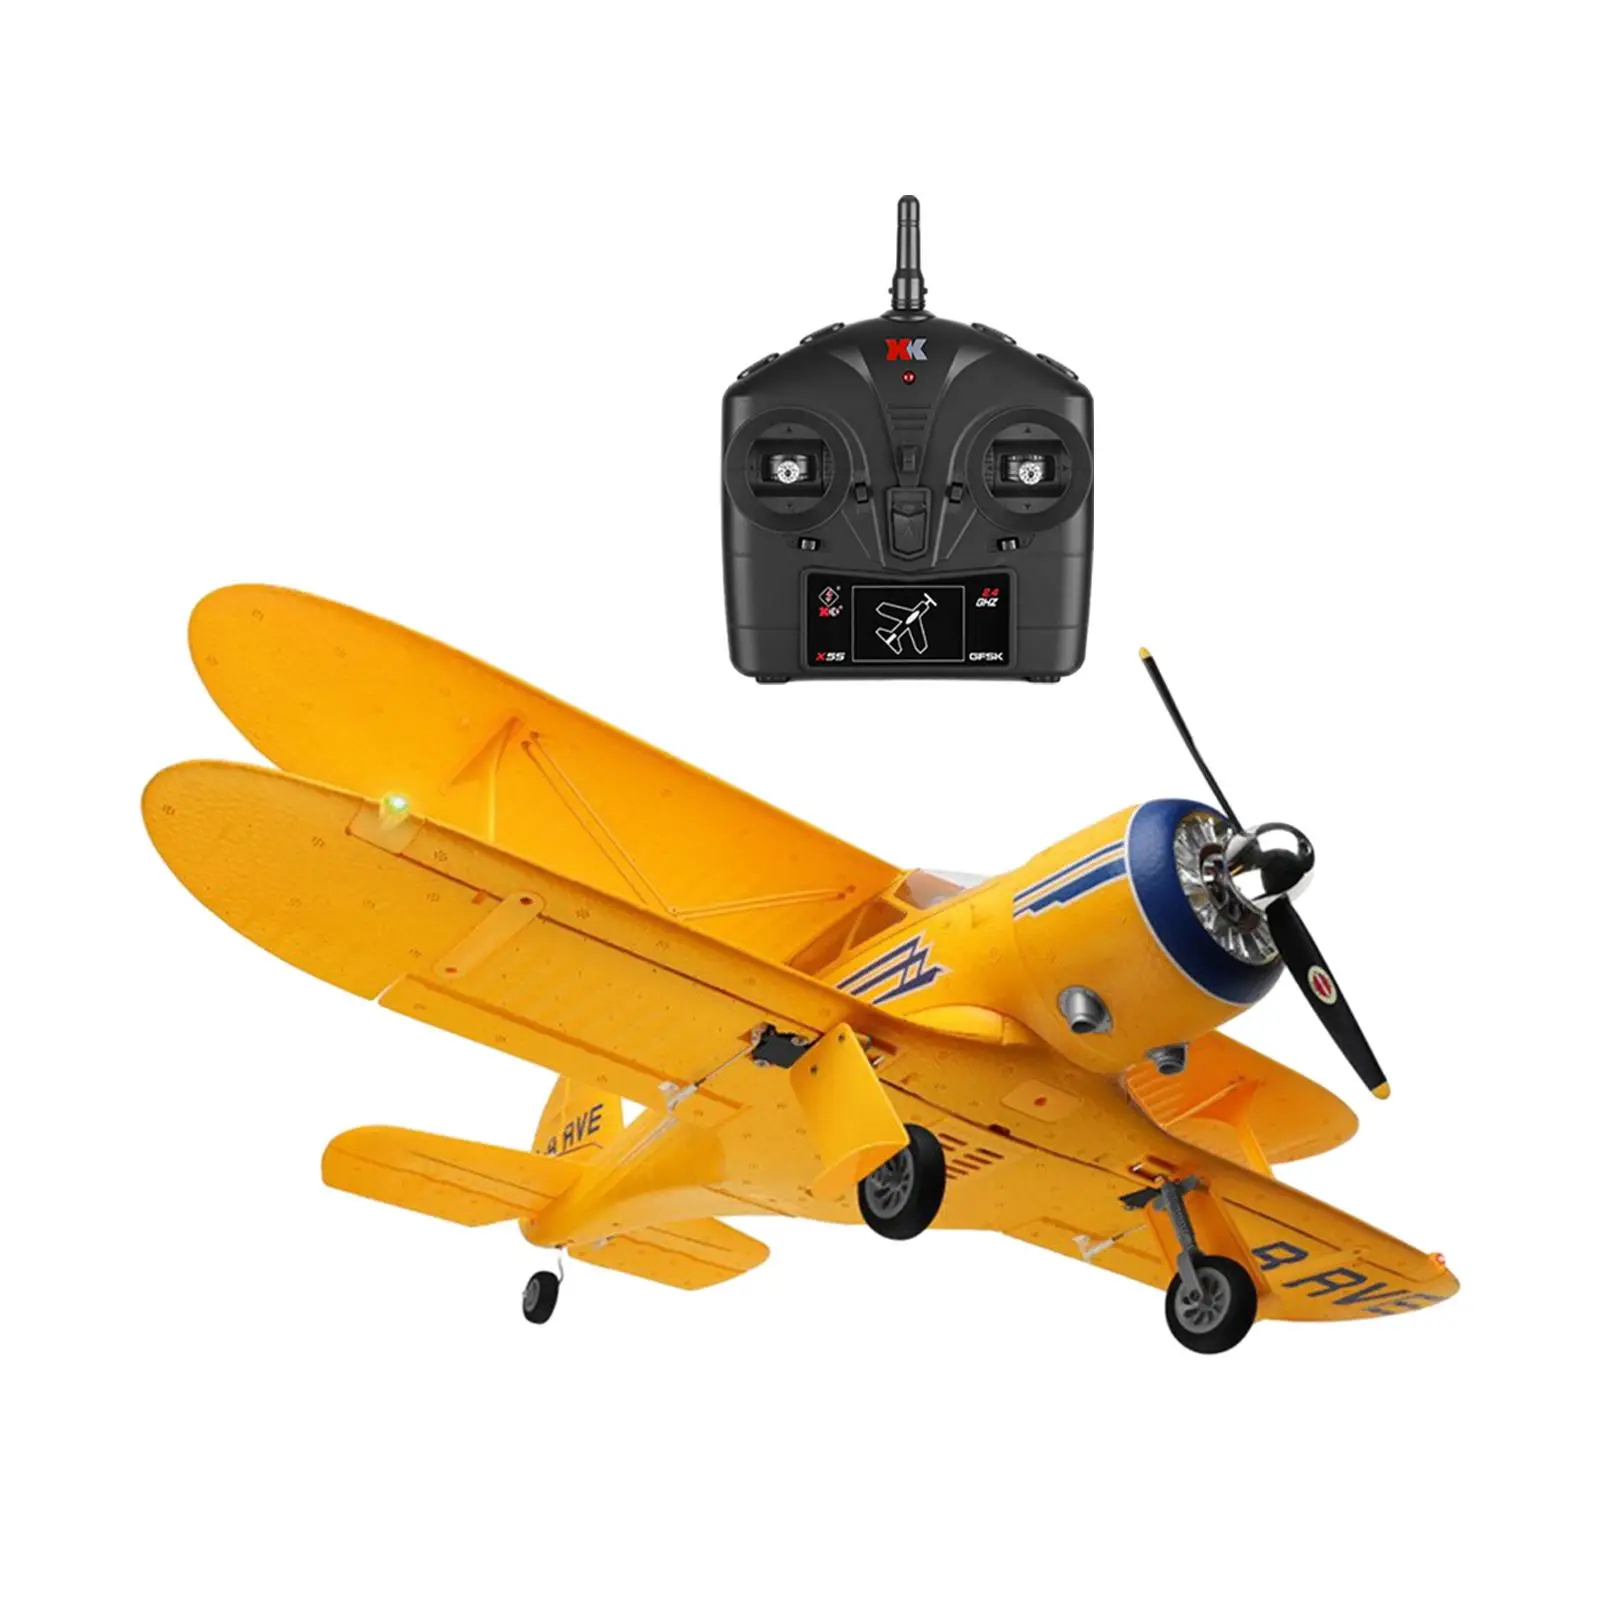 Wltoys A300 Beech D17S RC Plane 4 Channel Stunt Flying Brushless Motor 3D Brushless Airplane for Adults Kids Beginner Gifts